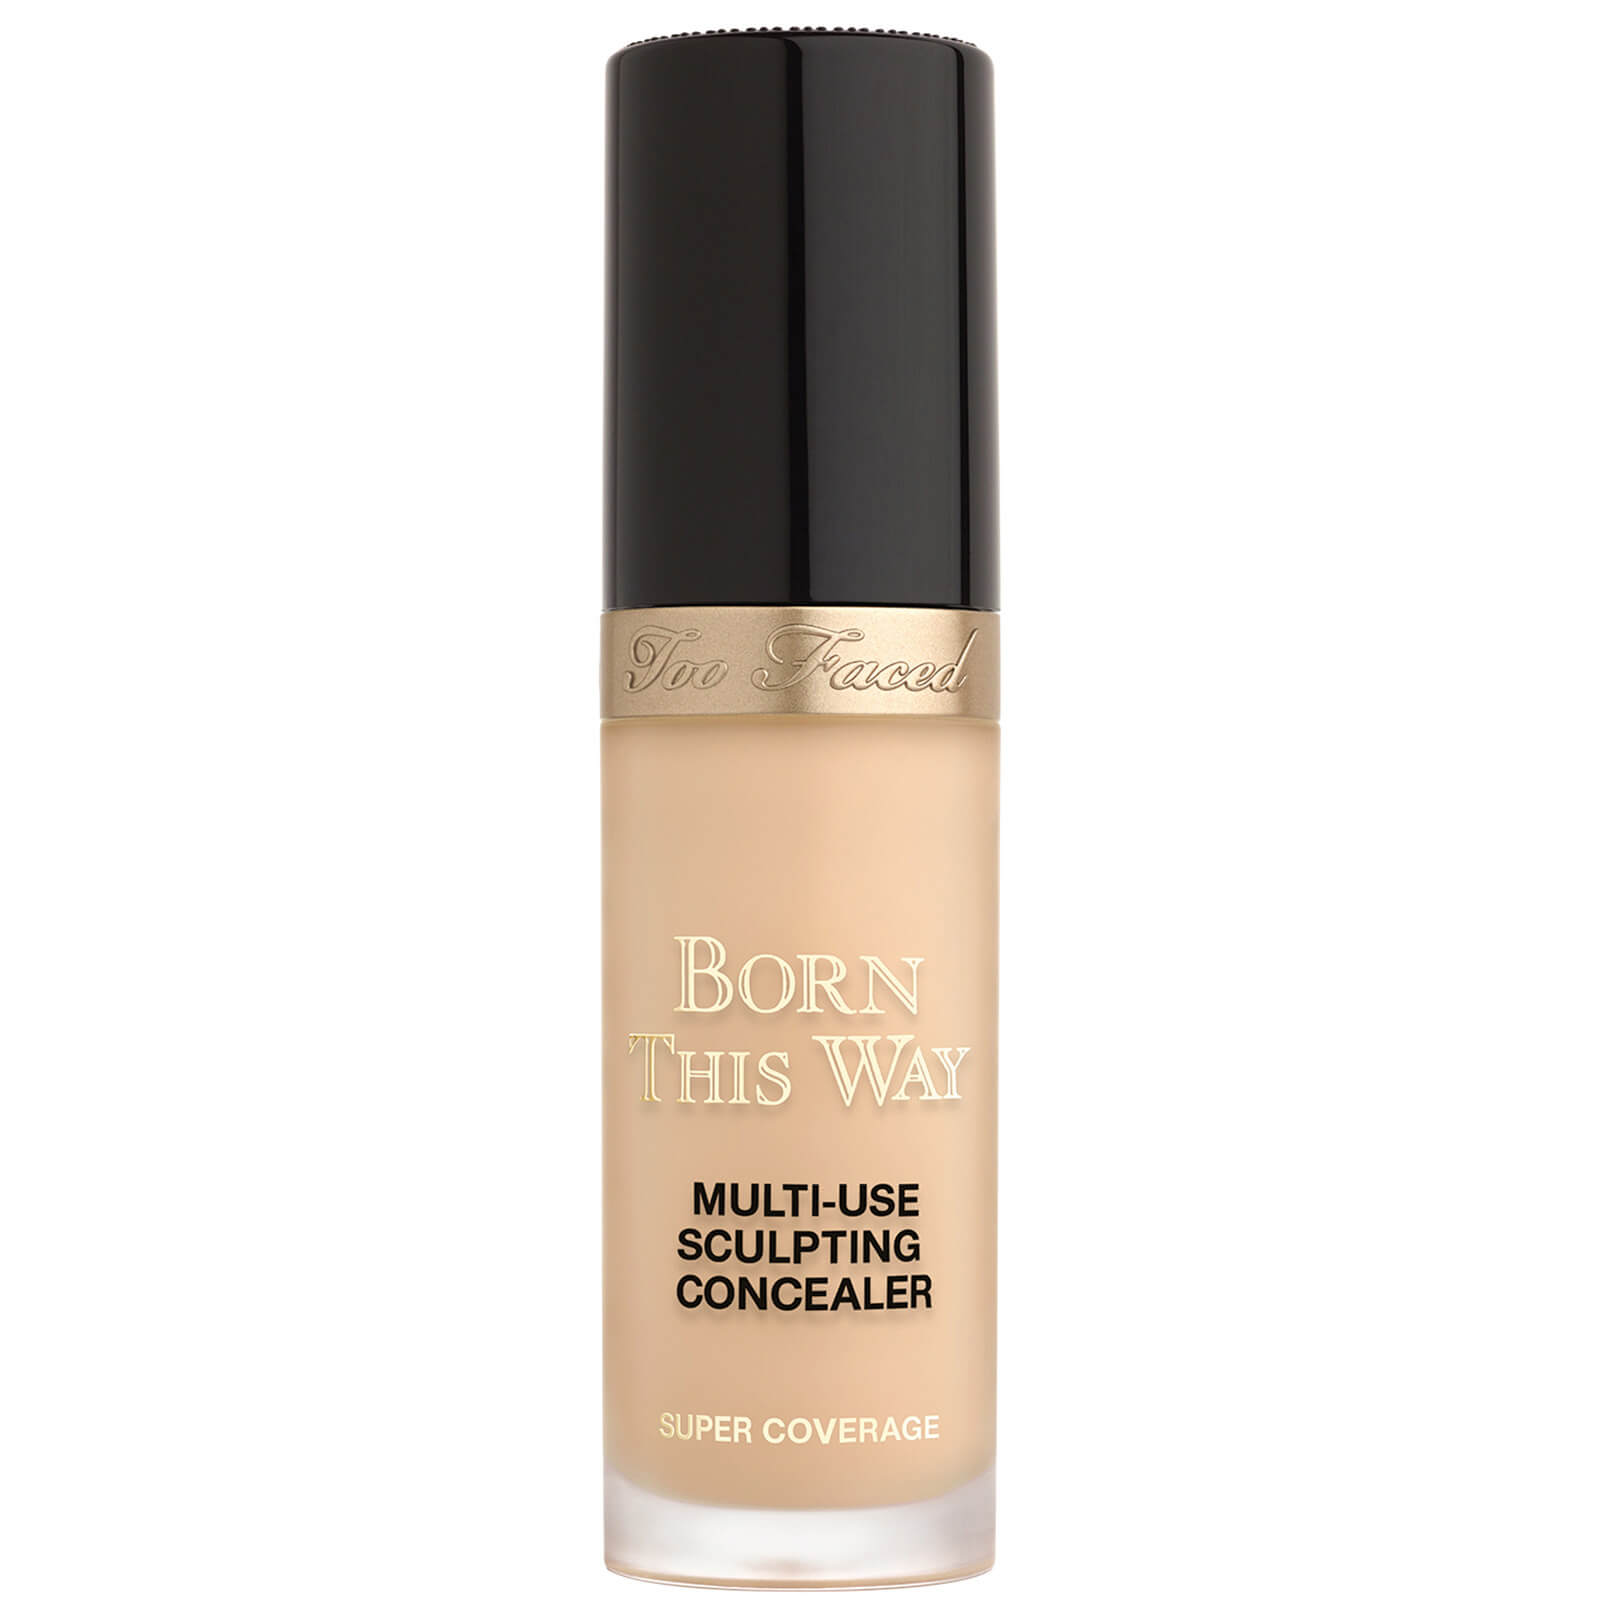 Too Faced Born This Way Super Coverage Multi-Use Concealer 13.5ml (Various Shades) - Natural Beige